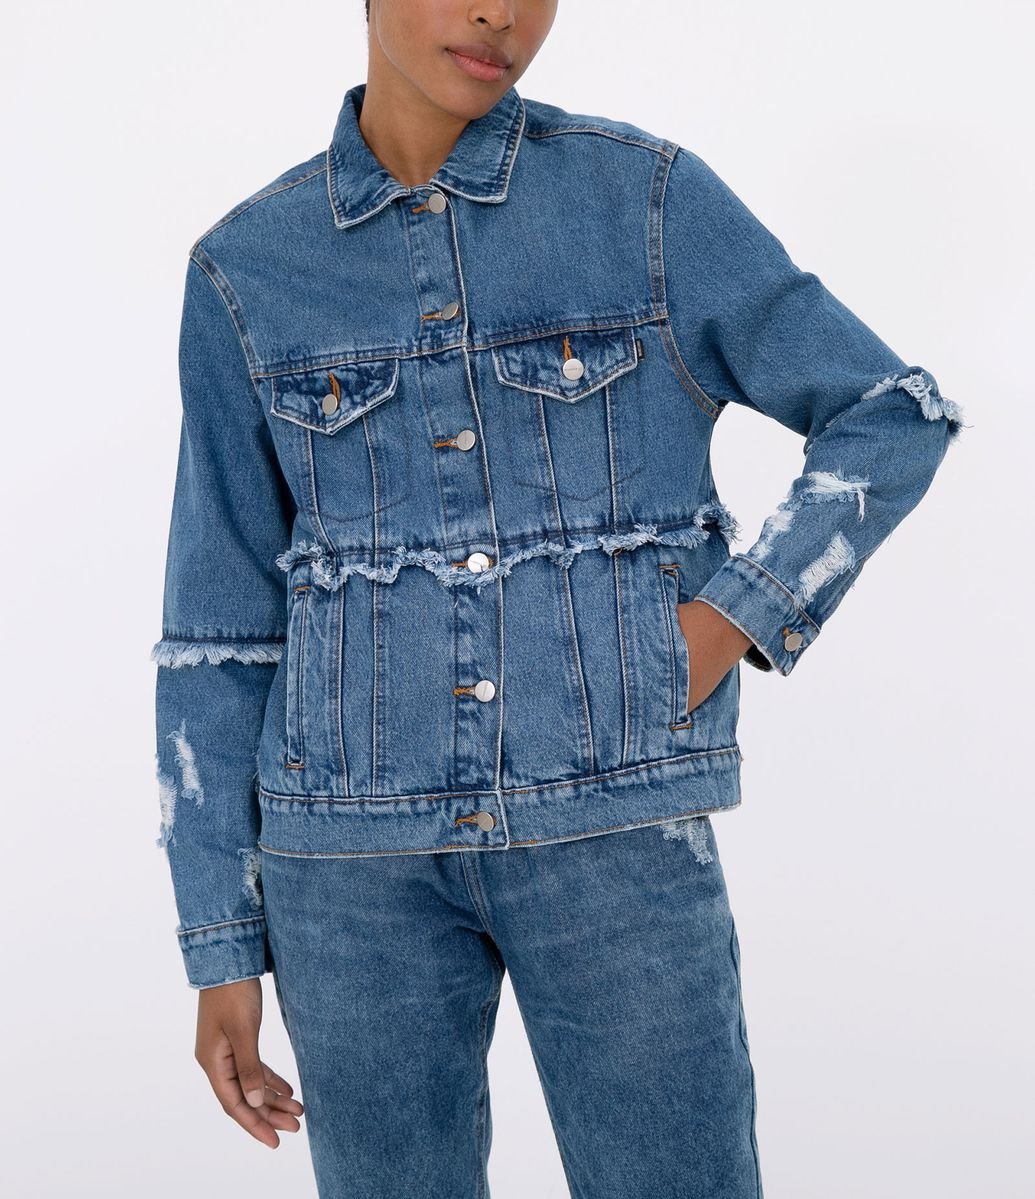 jaqueta jeans oversized renner